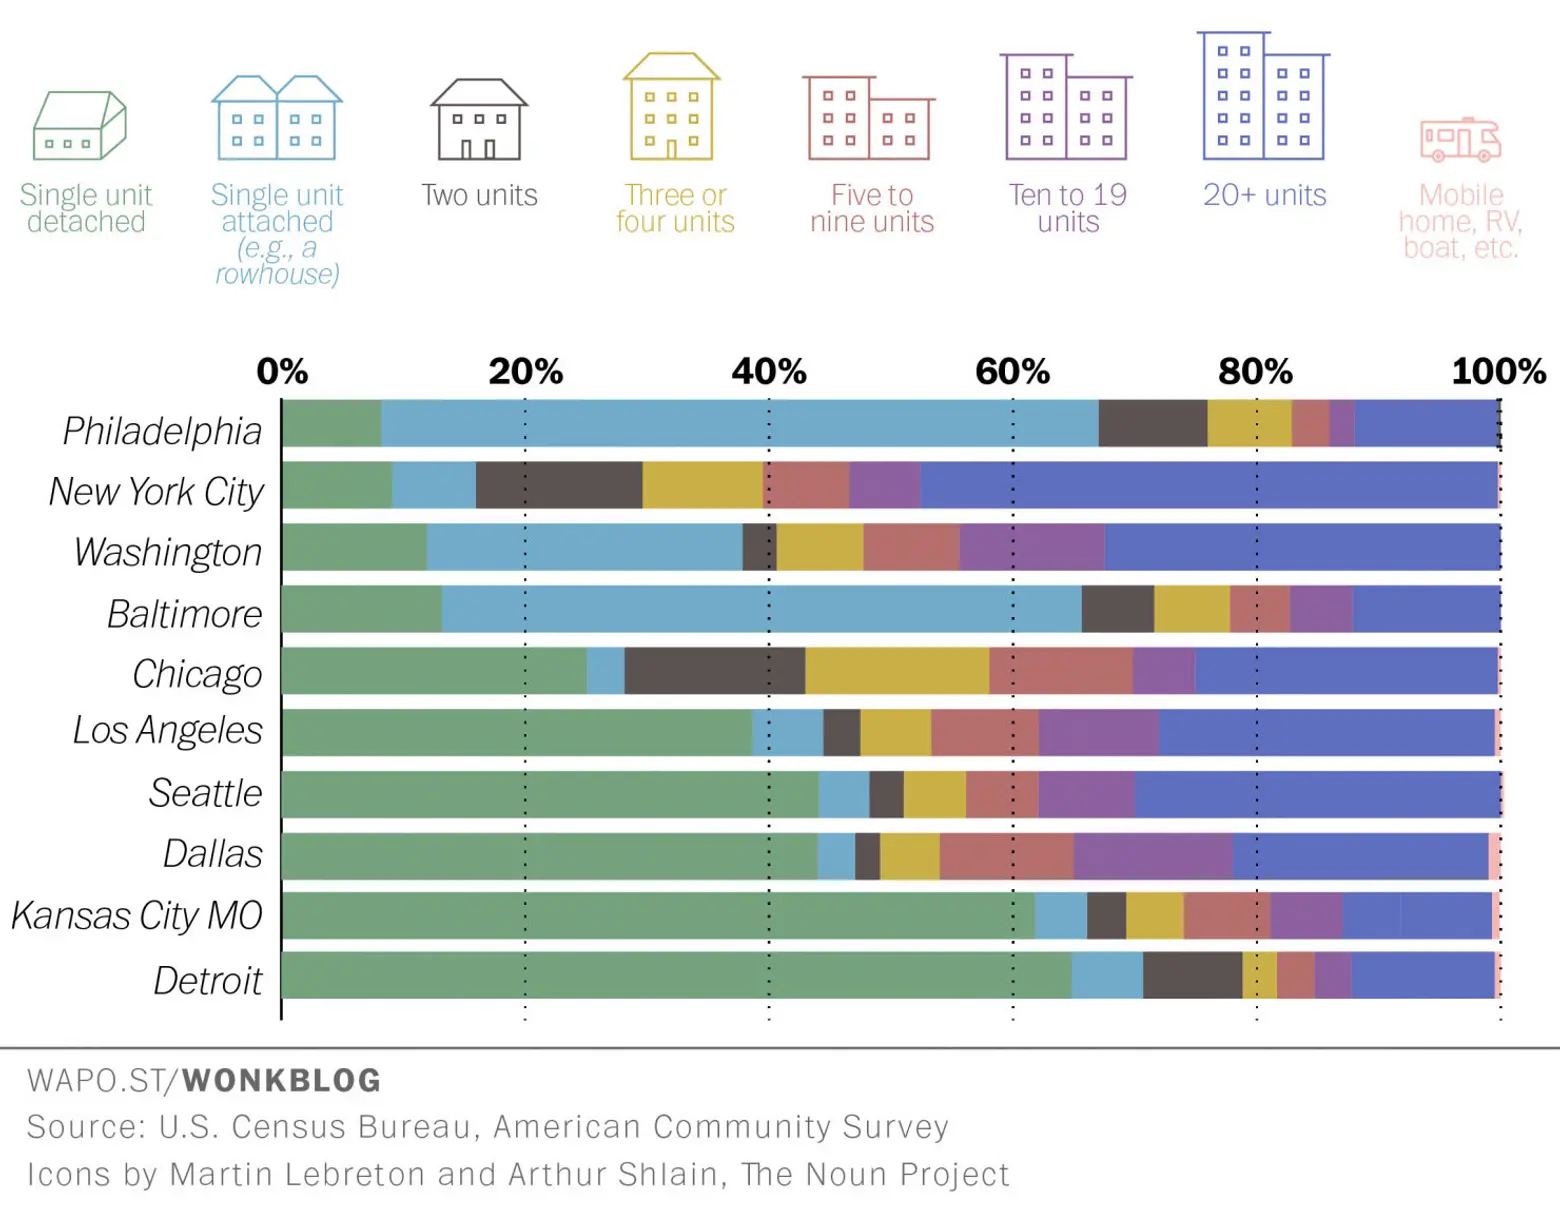 Infographic: The Most Popular Housing Typology in Major Cities Across the U.S.